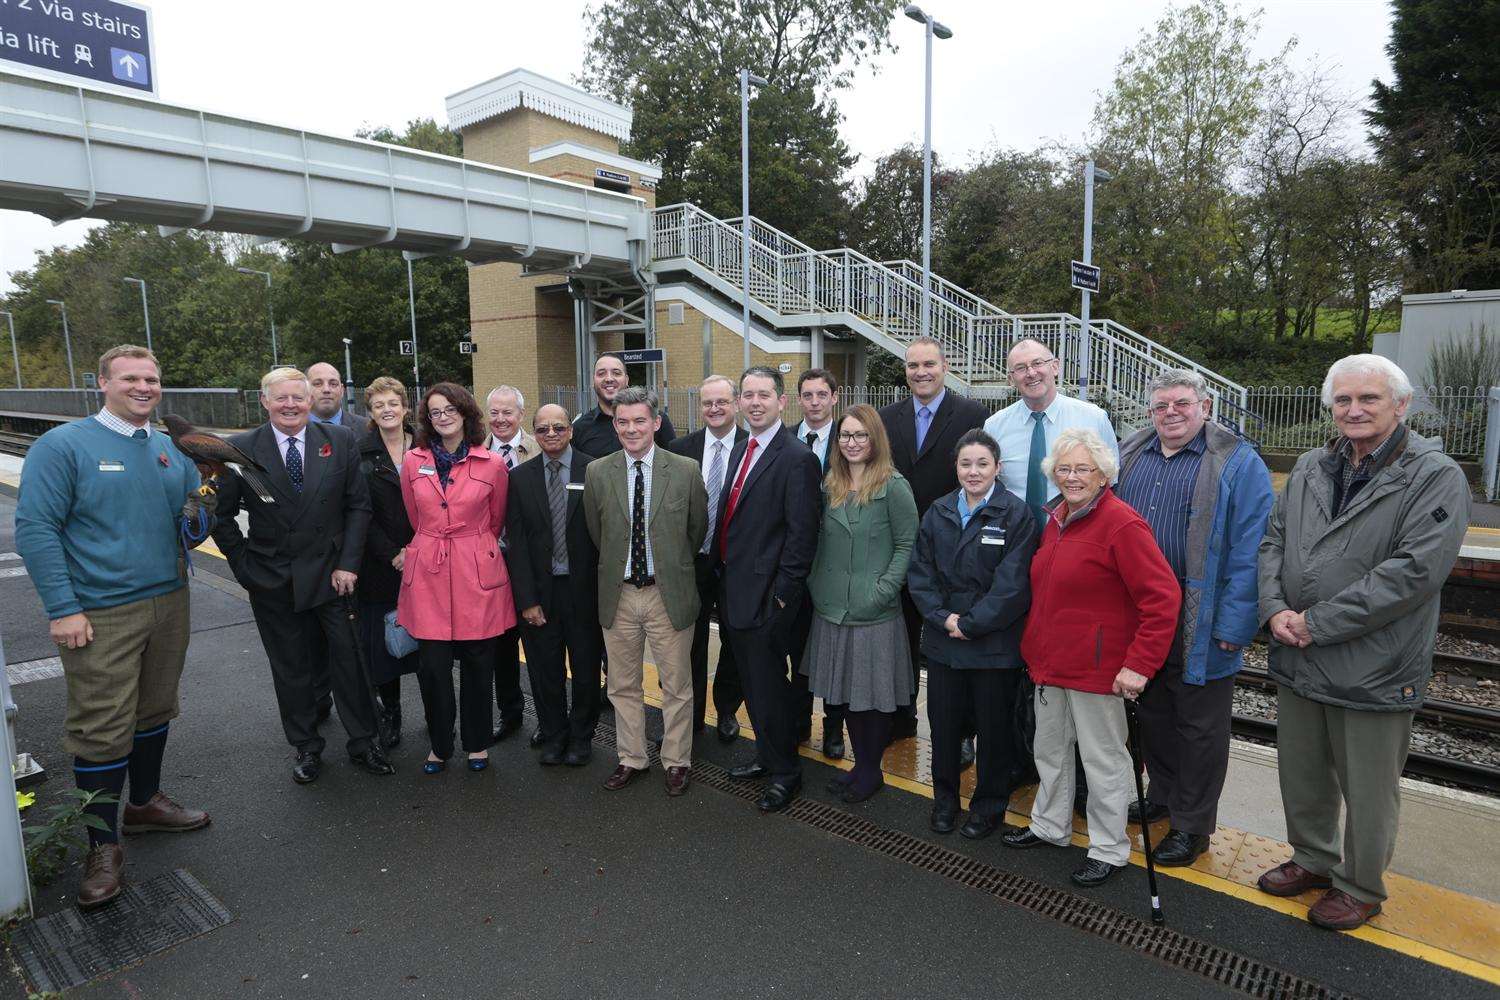 Officials gather at Bearsted station for the ceremony